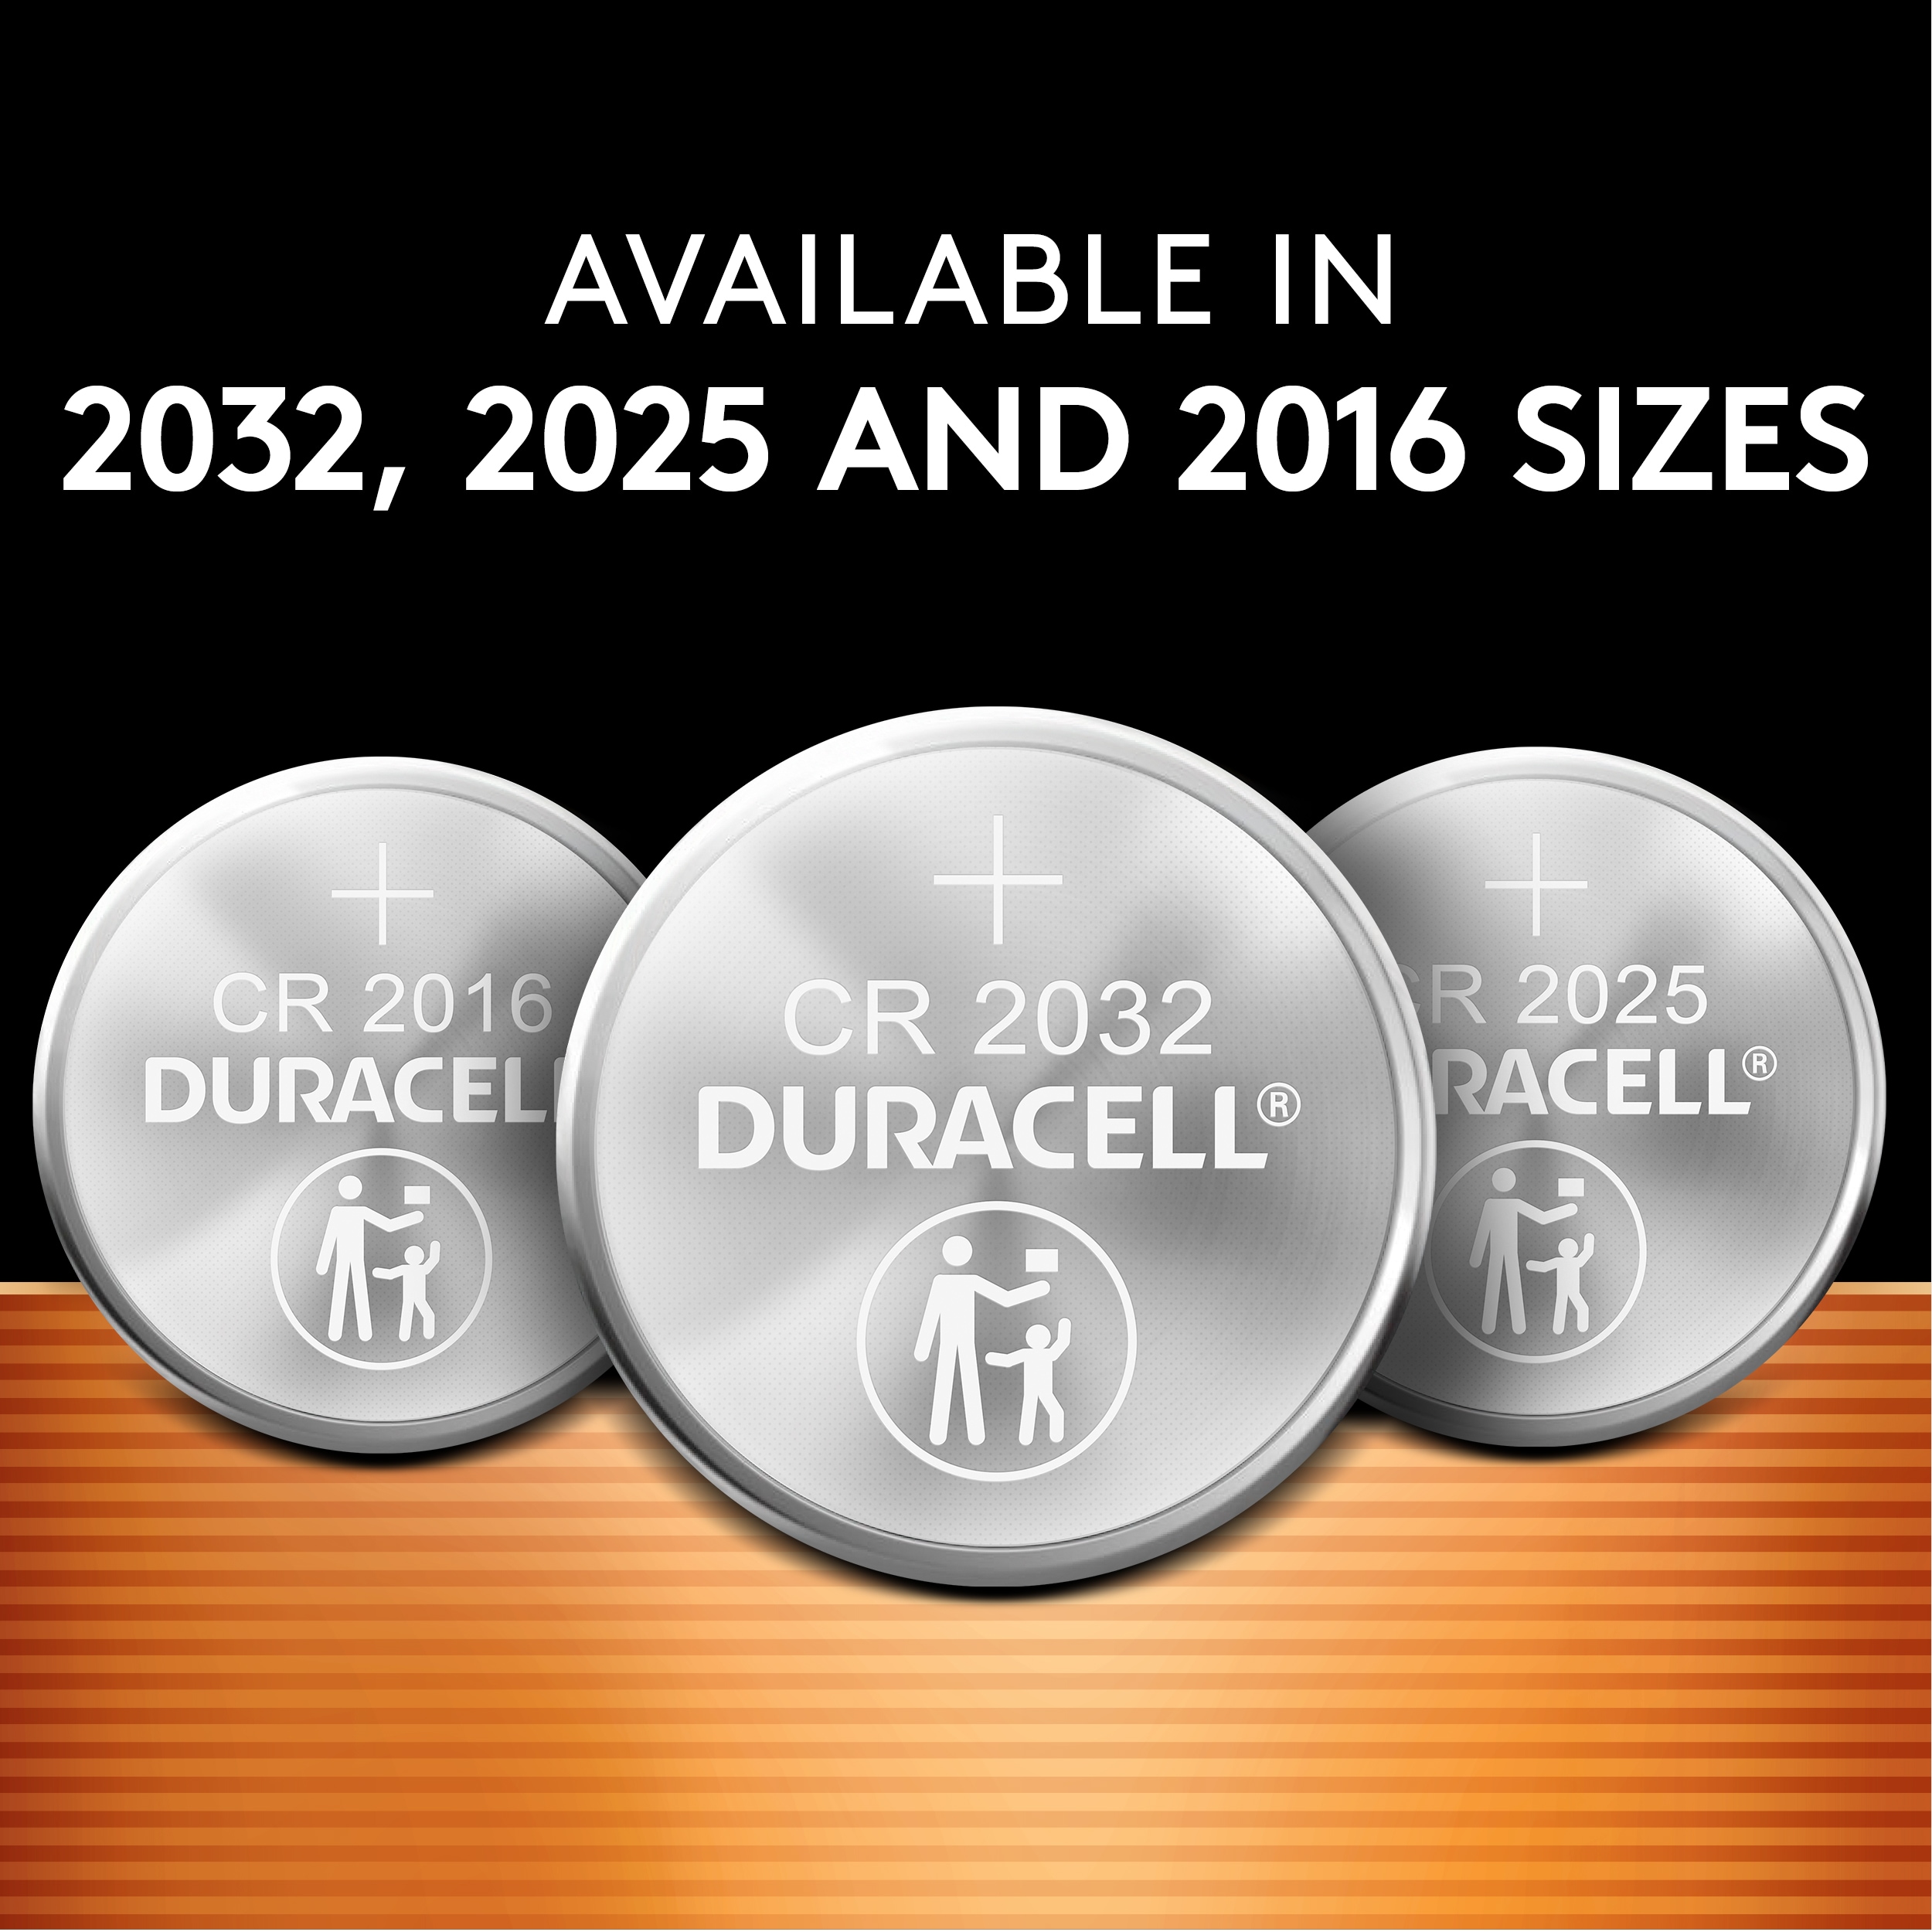  Duracell 1620 3V Lithium Battery, 1 Count Pack, Lithium Coin  Battery for Medical and Fitness Devices, Watches, and more, CR Lithium 3  Volt Cell : Health & Household